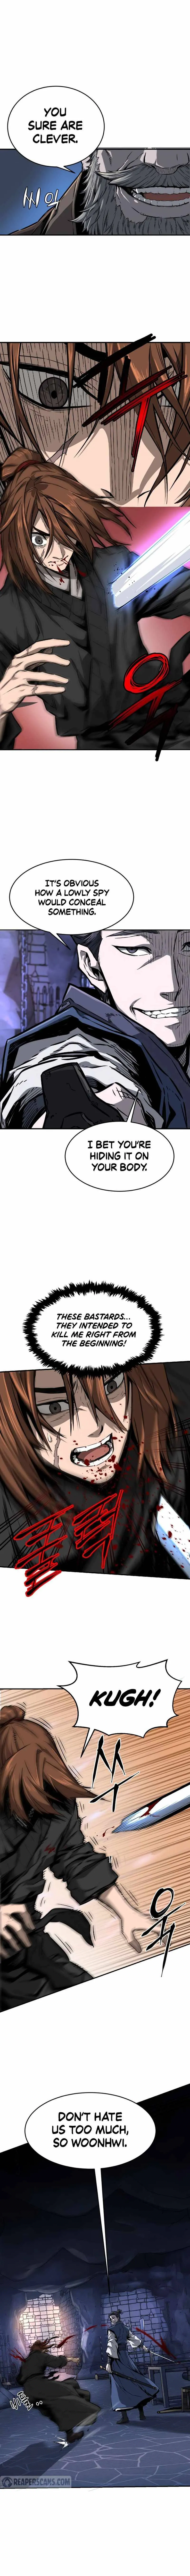 Absolute Sword Sense Chapter 1 page 7